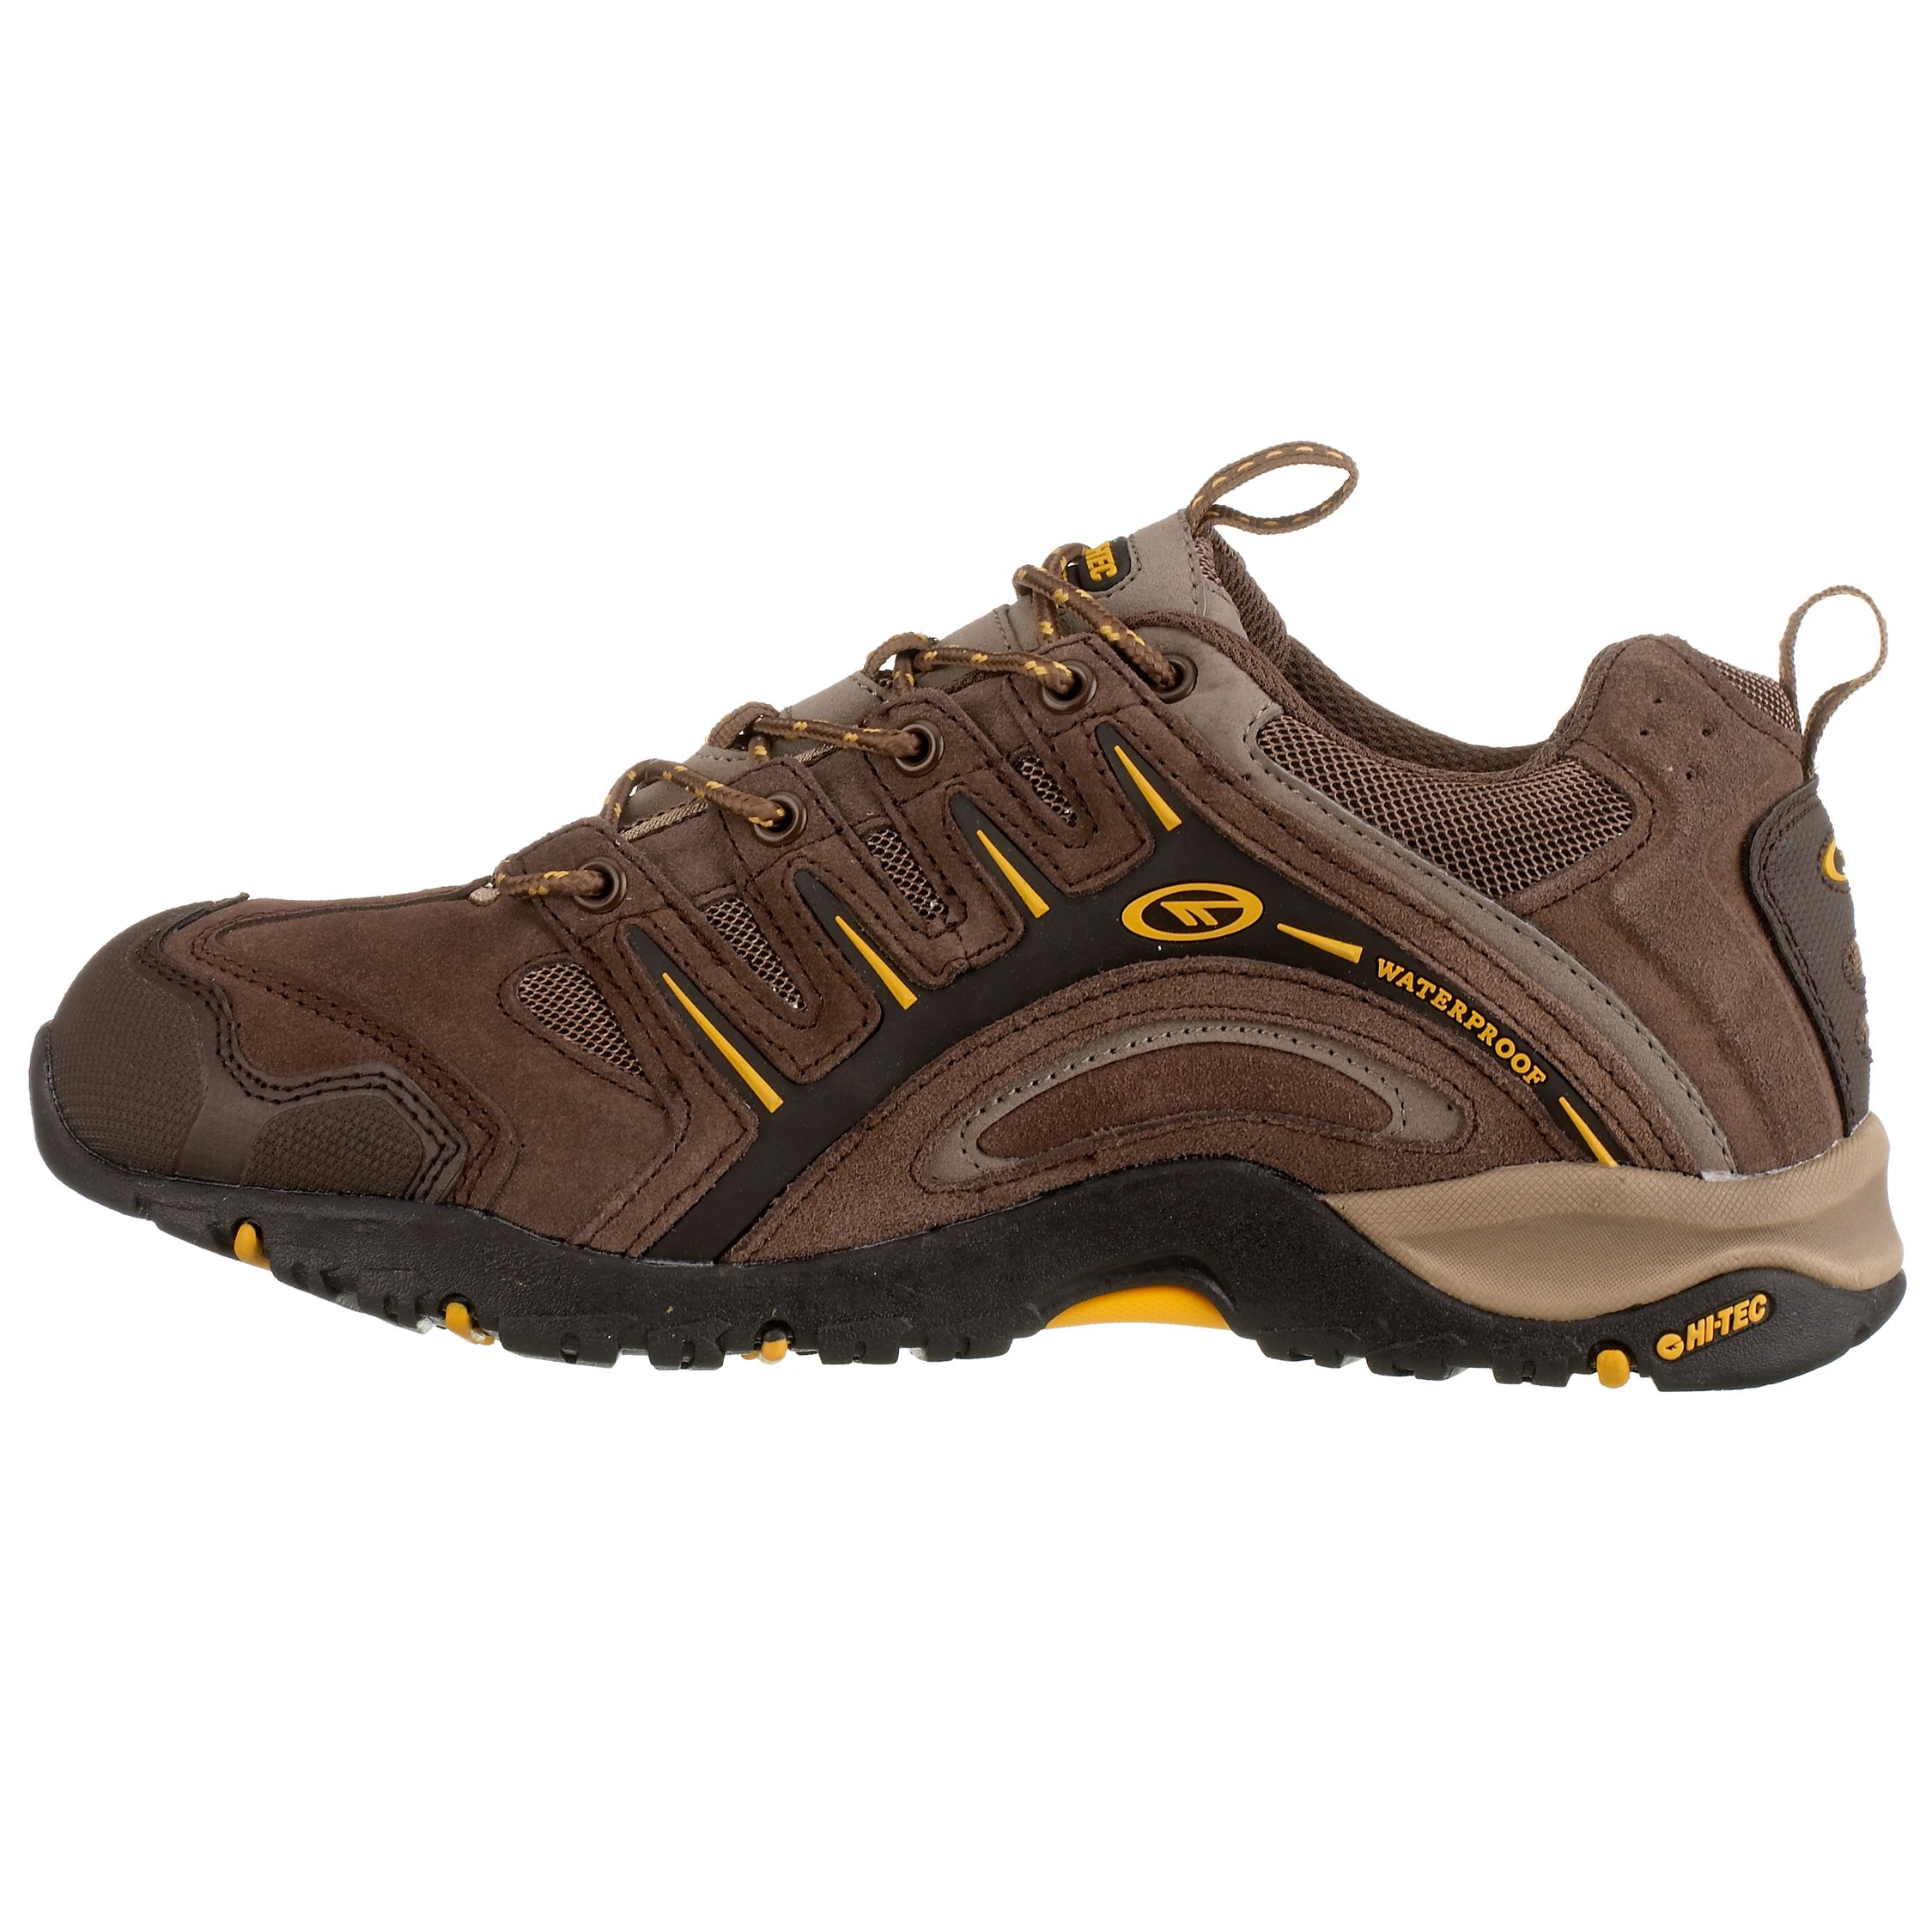 Waterproof Auckland Trail Shoes,